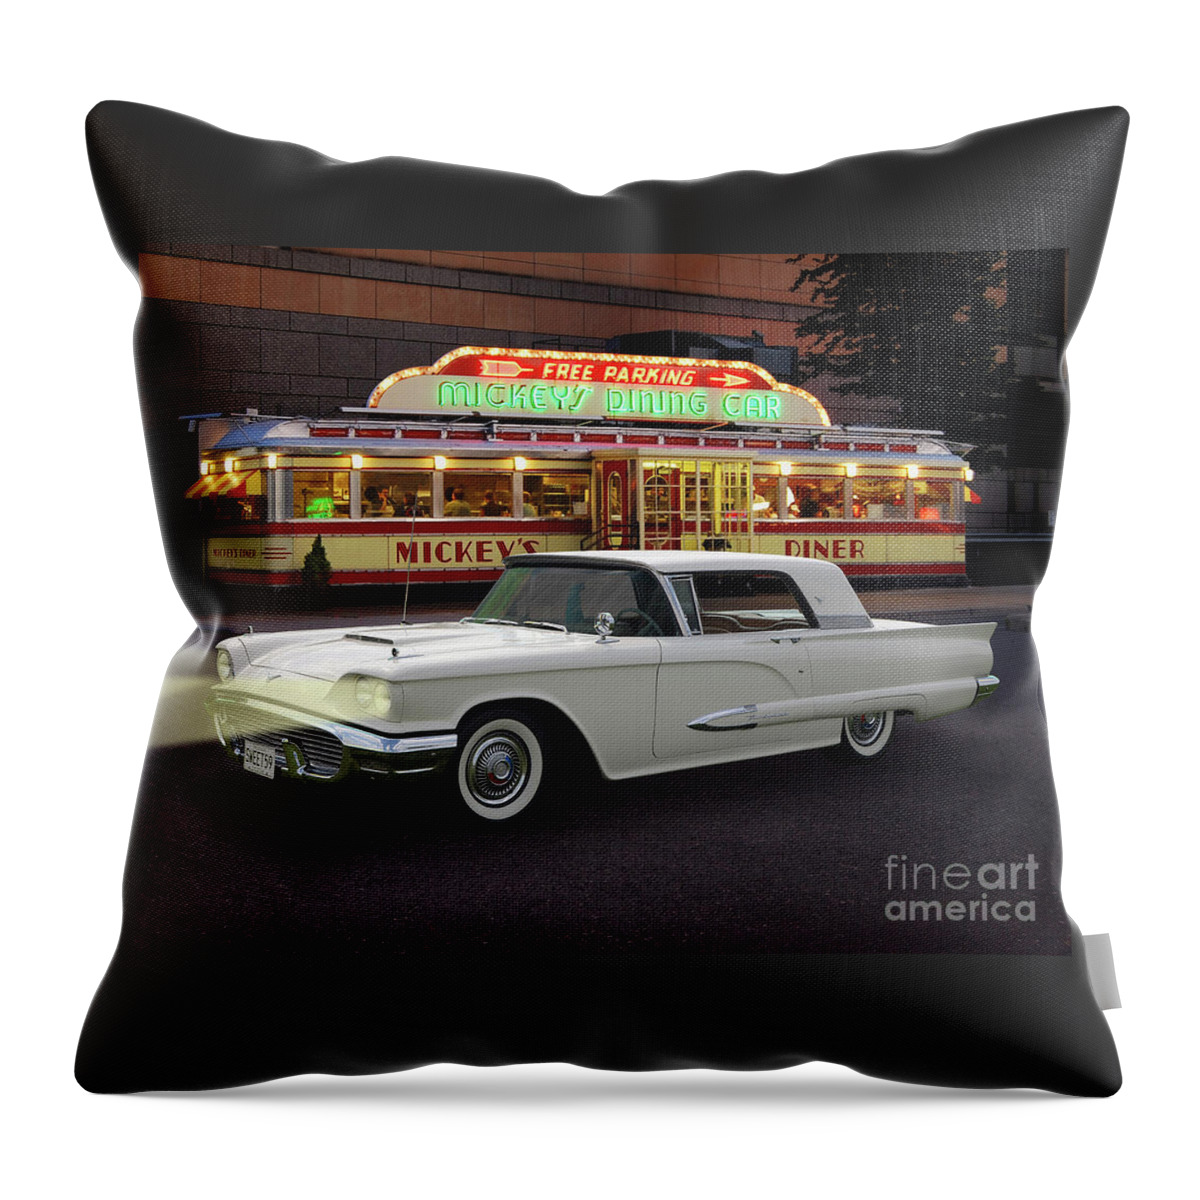 Sweet 59 Throw Pillow featuring the photograph Sweet 59 At Mickey's Diner by Ron Long